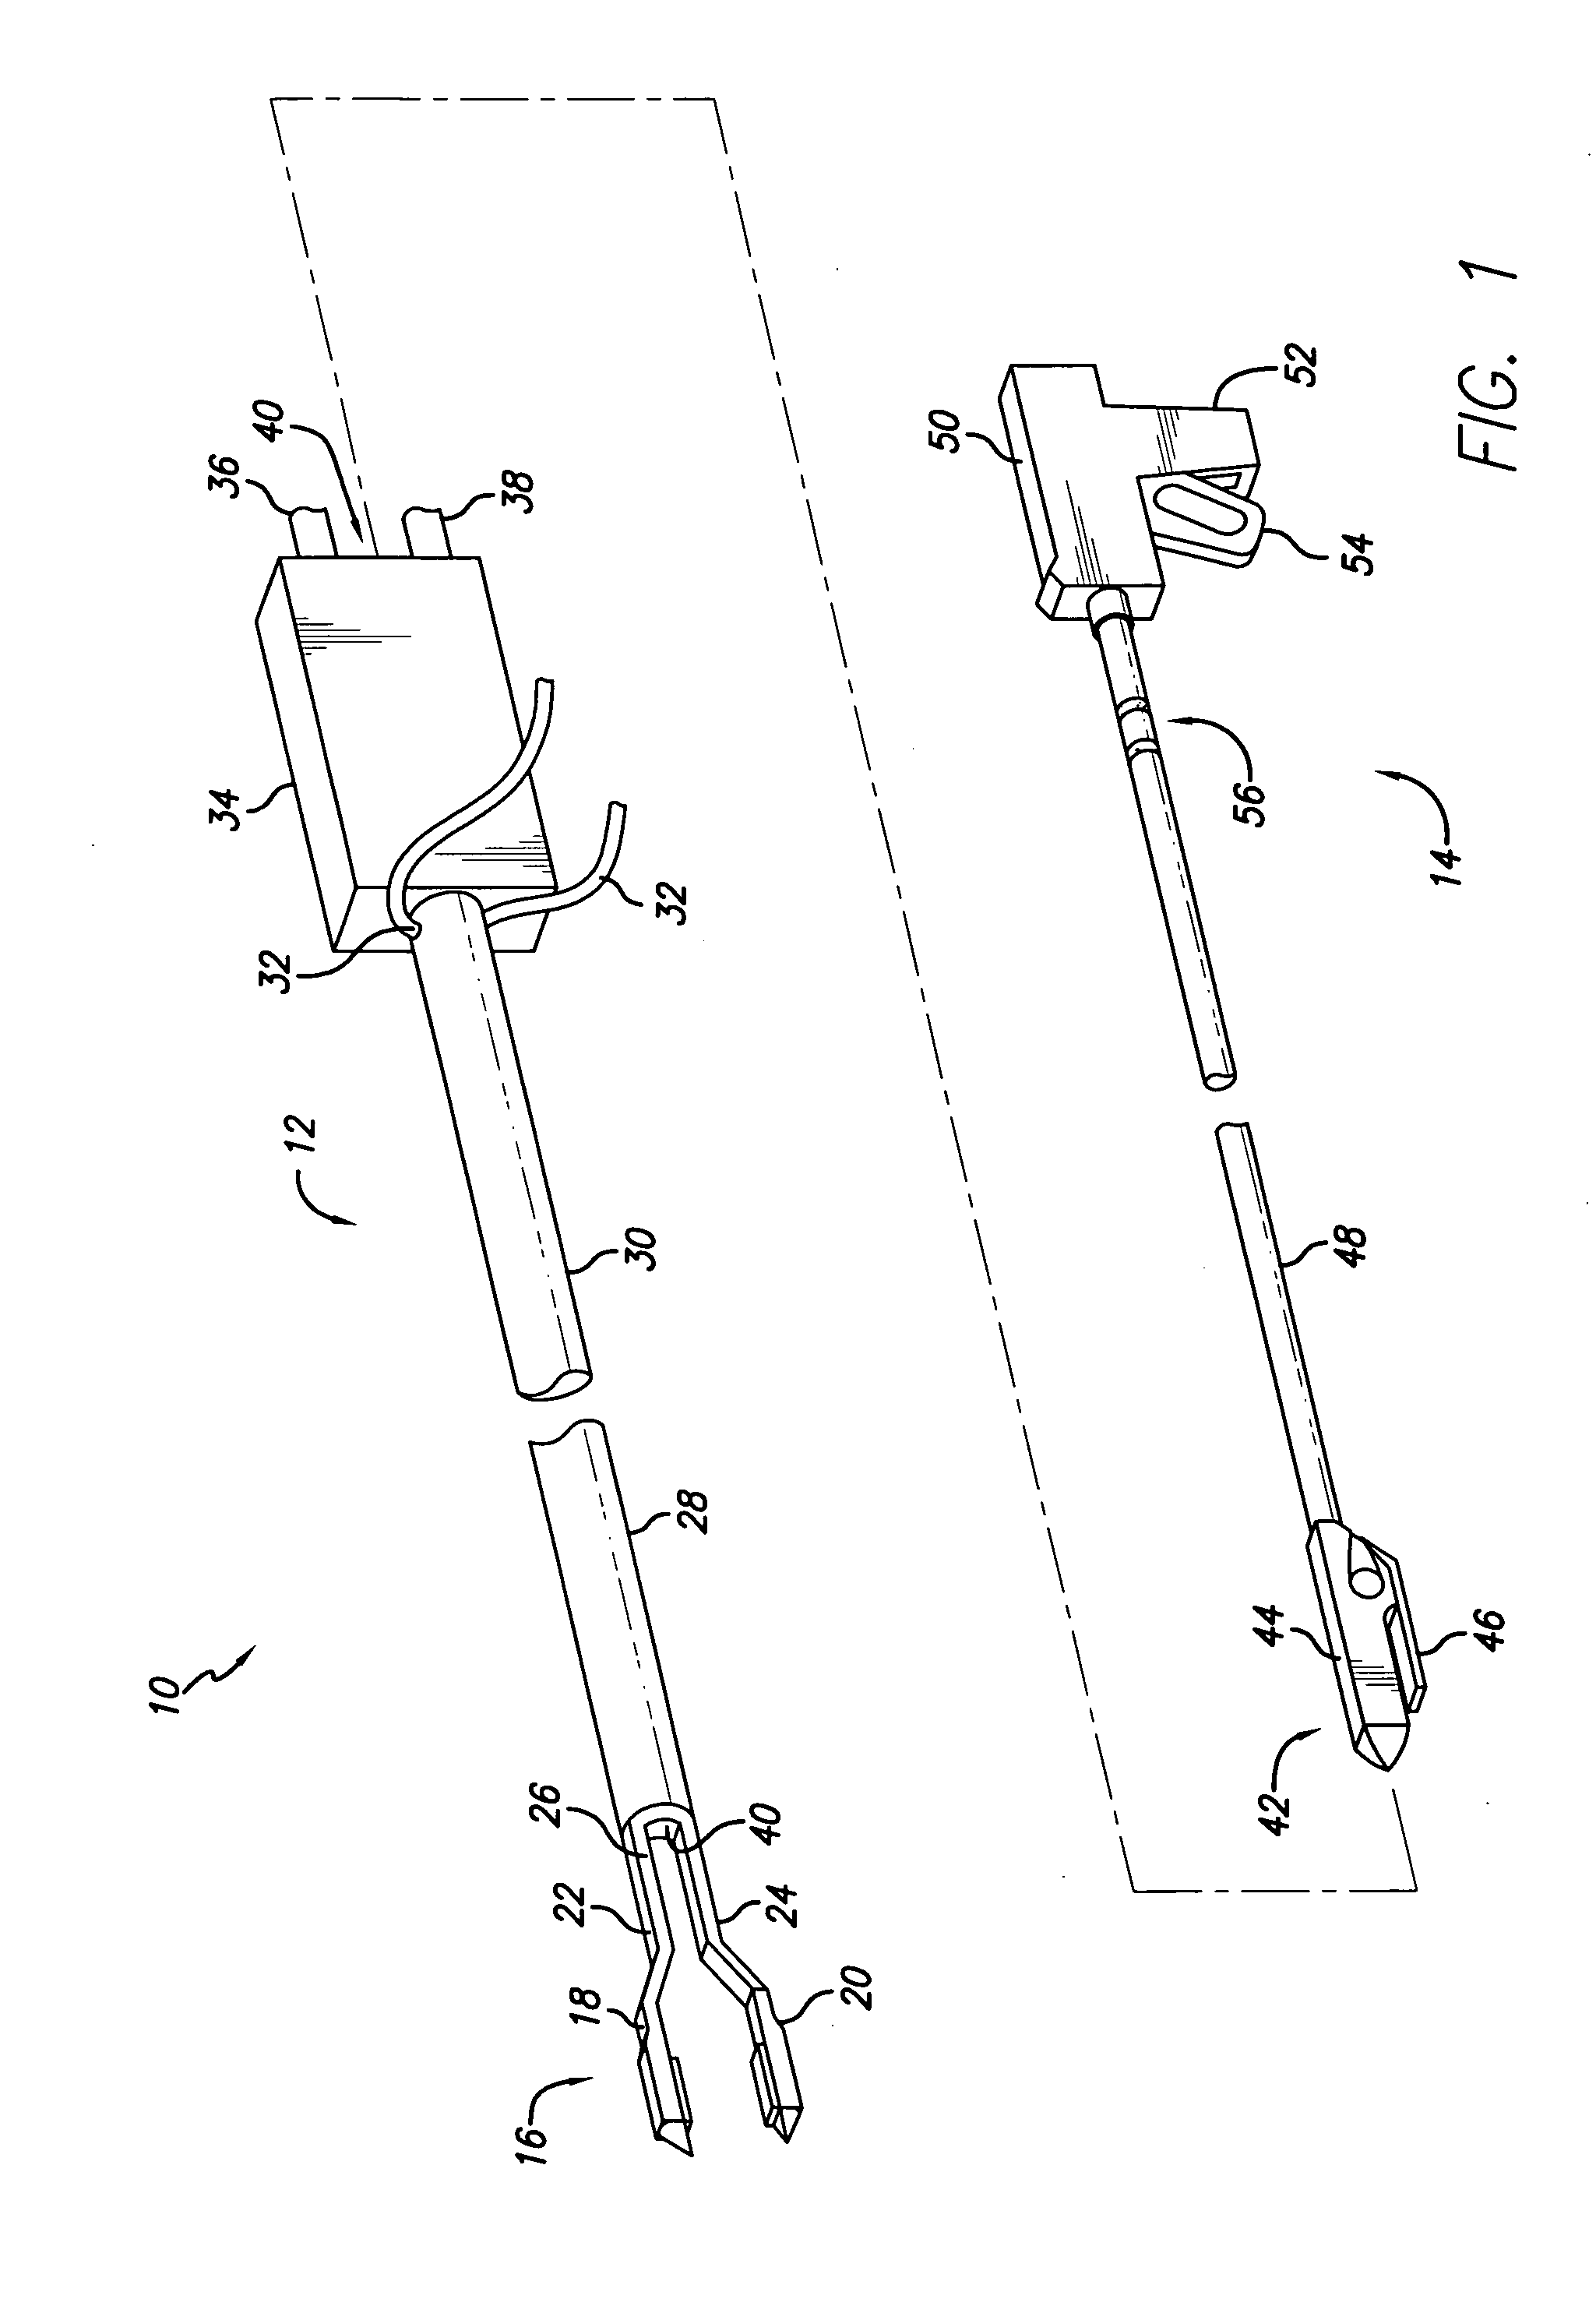 Single fold device for tissue fixation